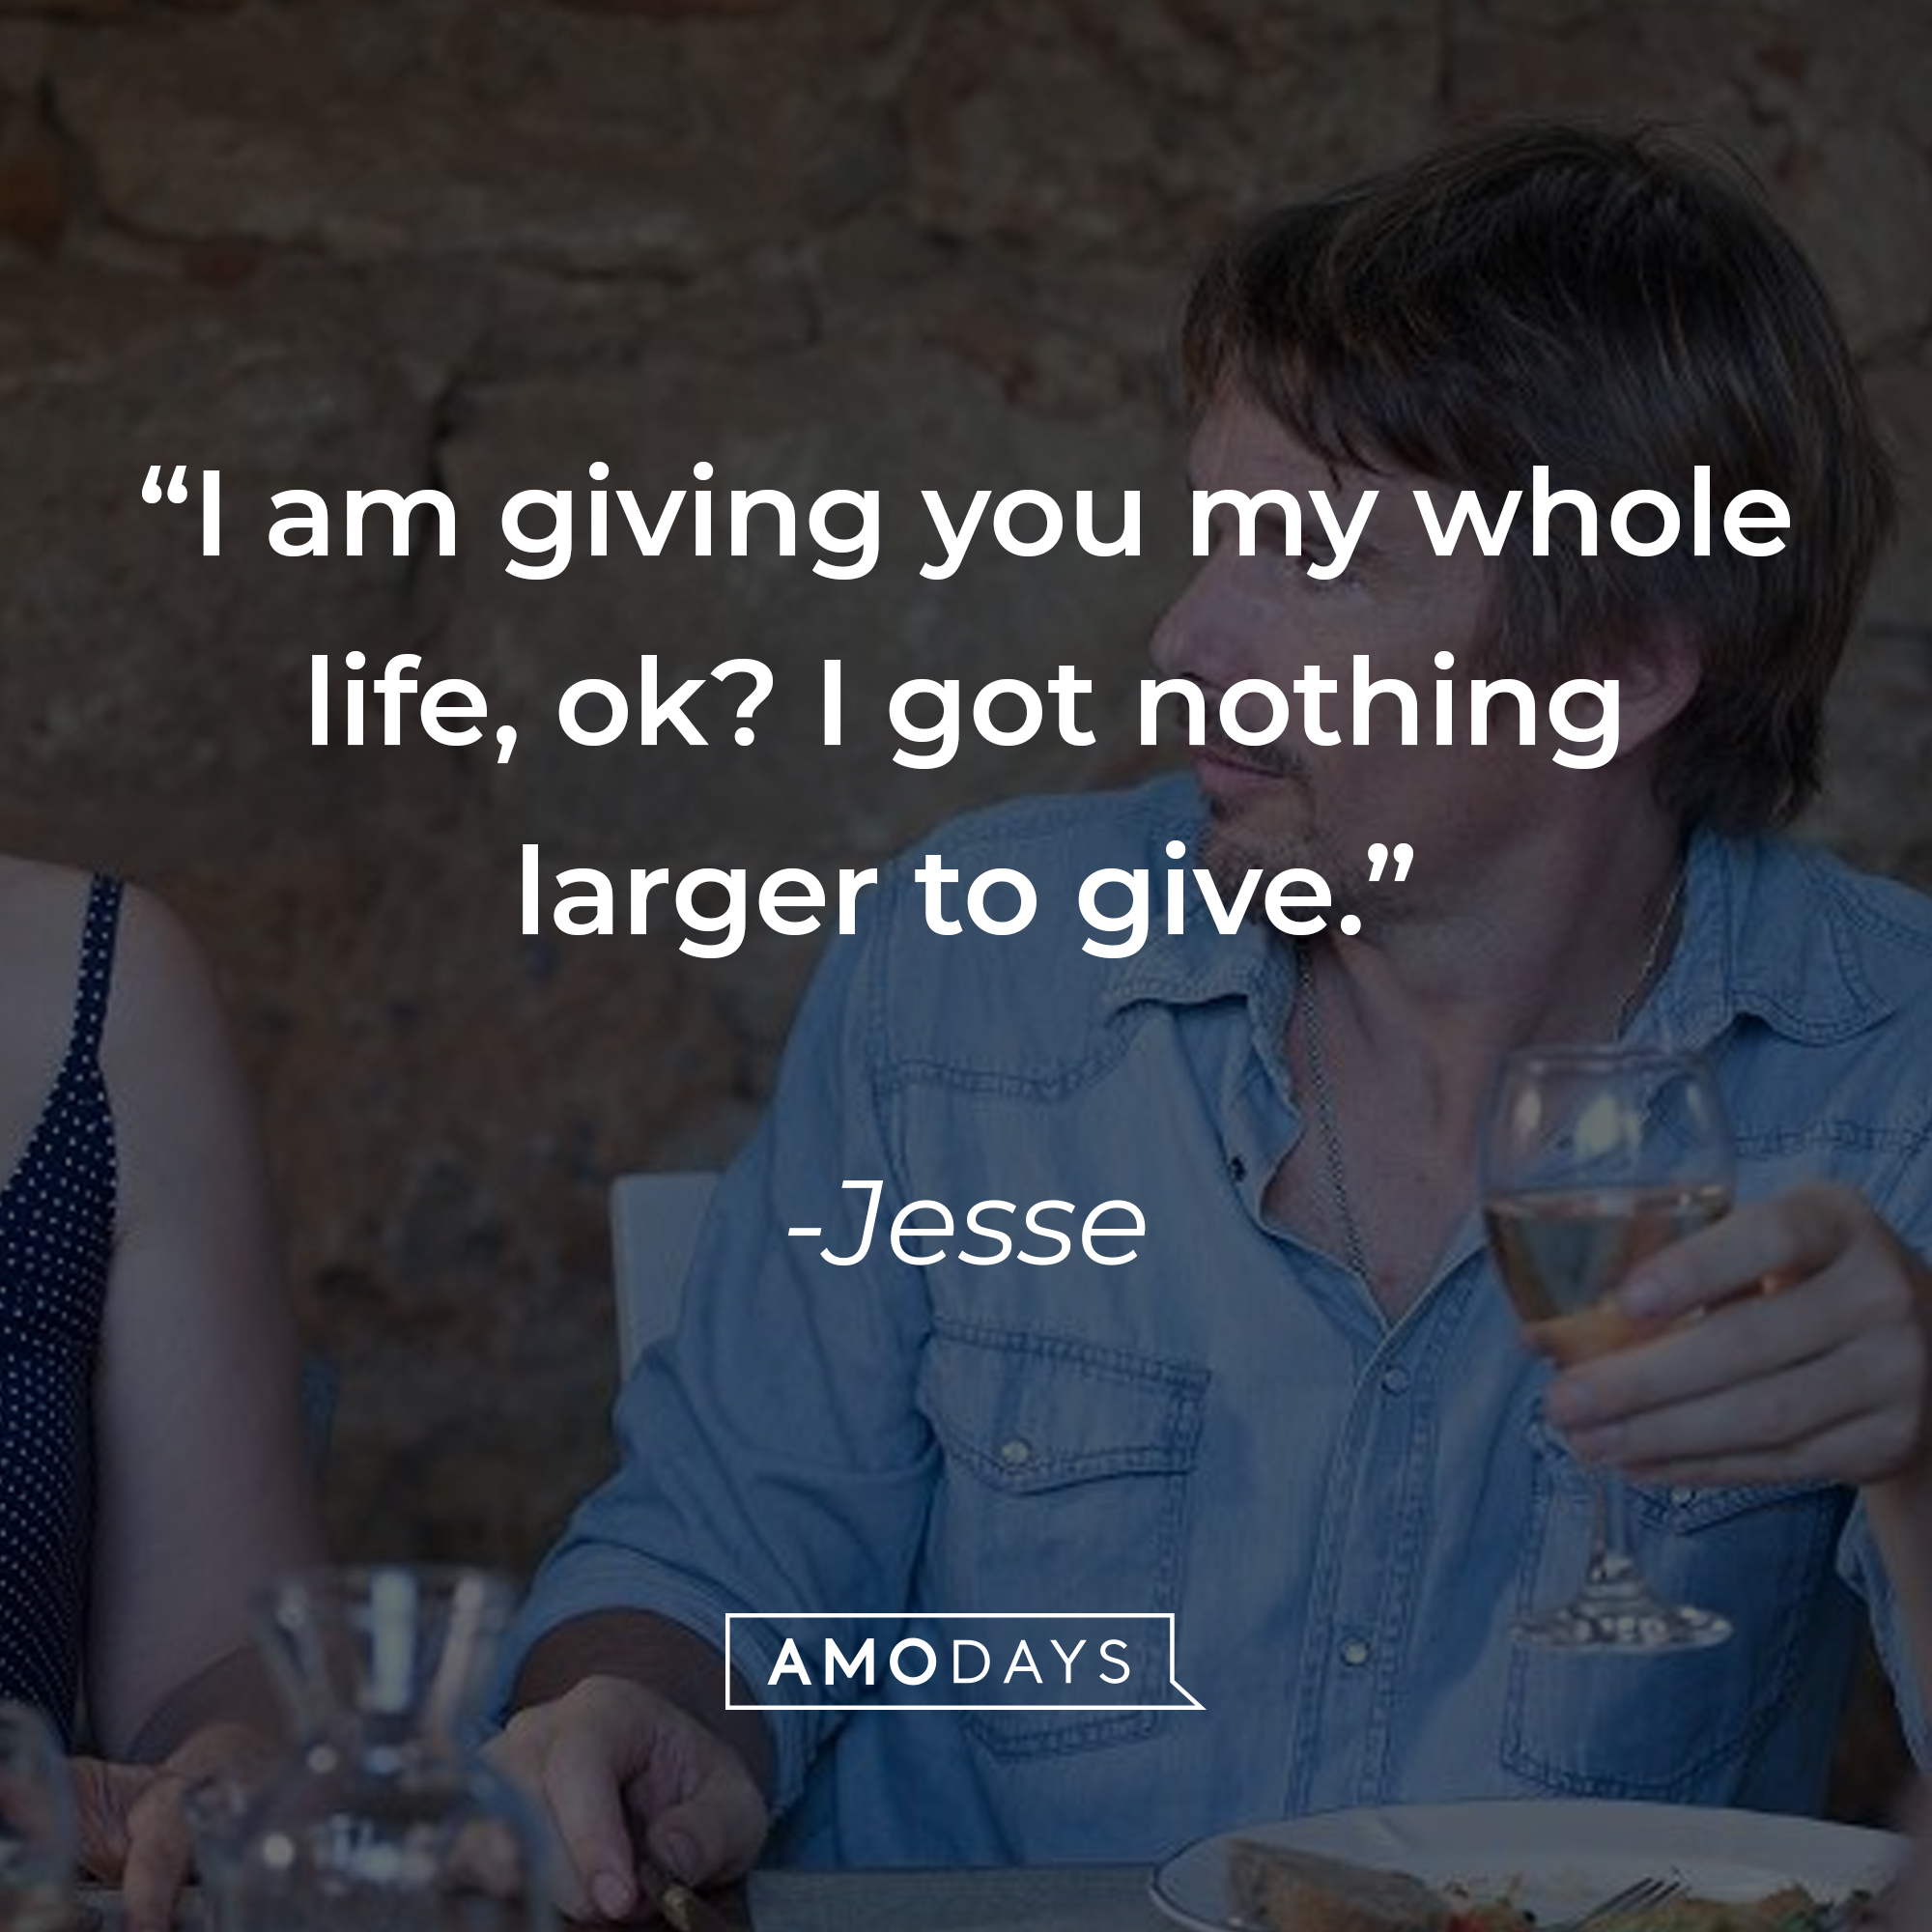 Jesse, with his quote: "I am giving you my whole life, okay? I got nothing larger to give.” │Source: facebook.com/BeforeMidnightFilm